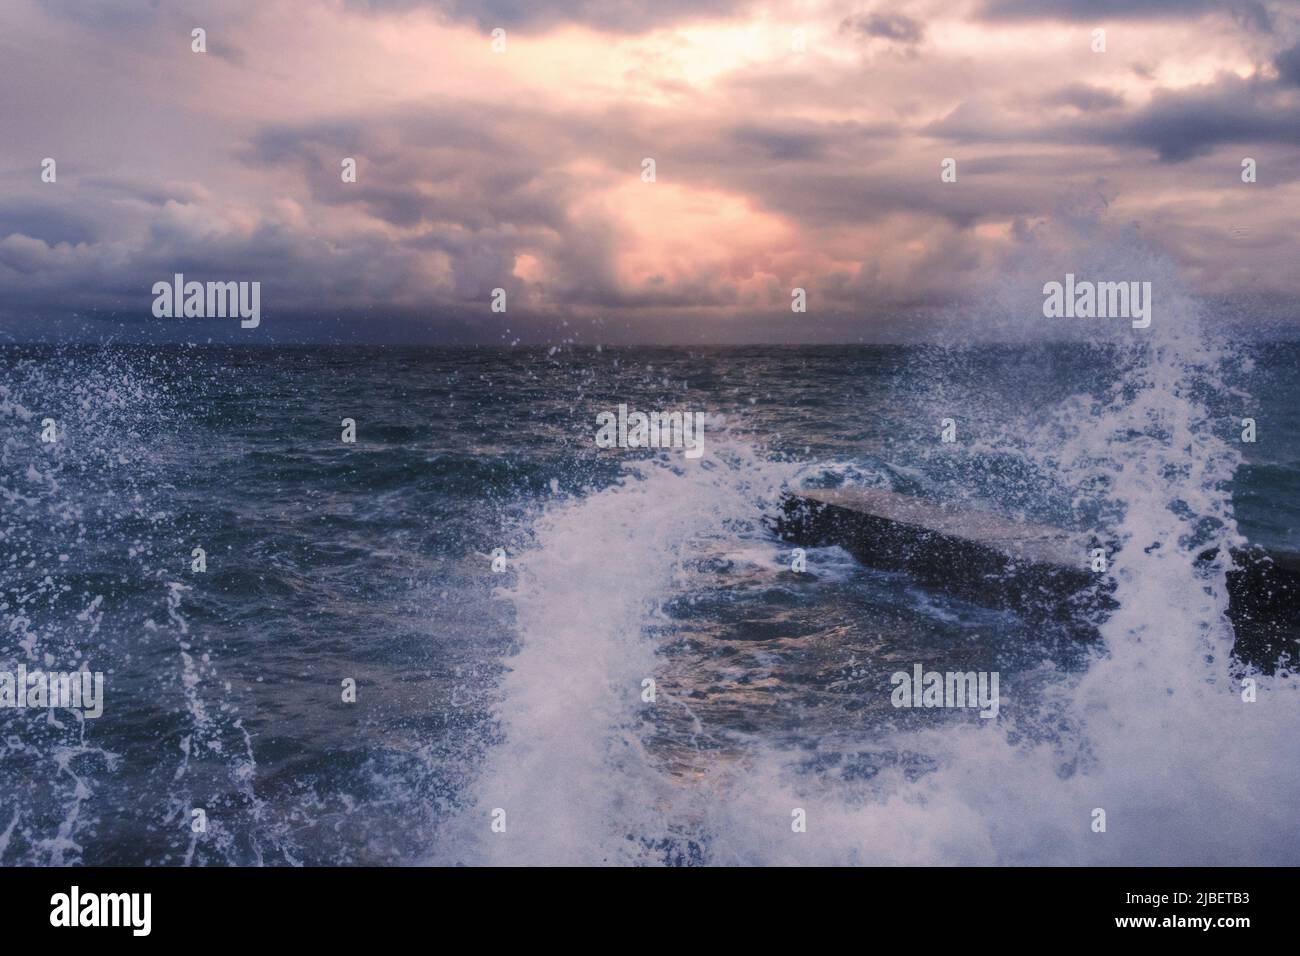 Storm at Black sea at sunset in spring. Sea view with waves during rain and cloudy in Alupka. Crimea. Soft focus Stock Photo